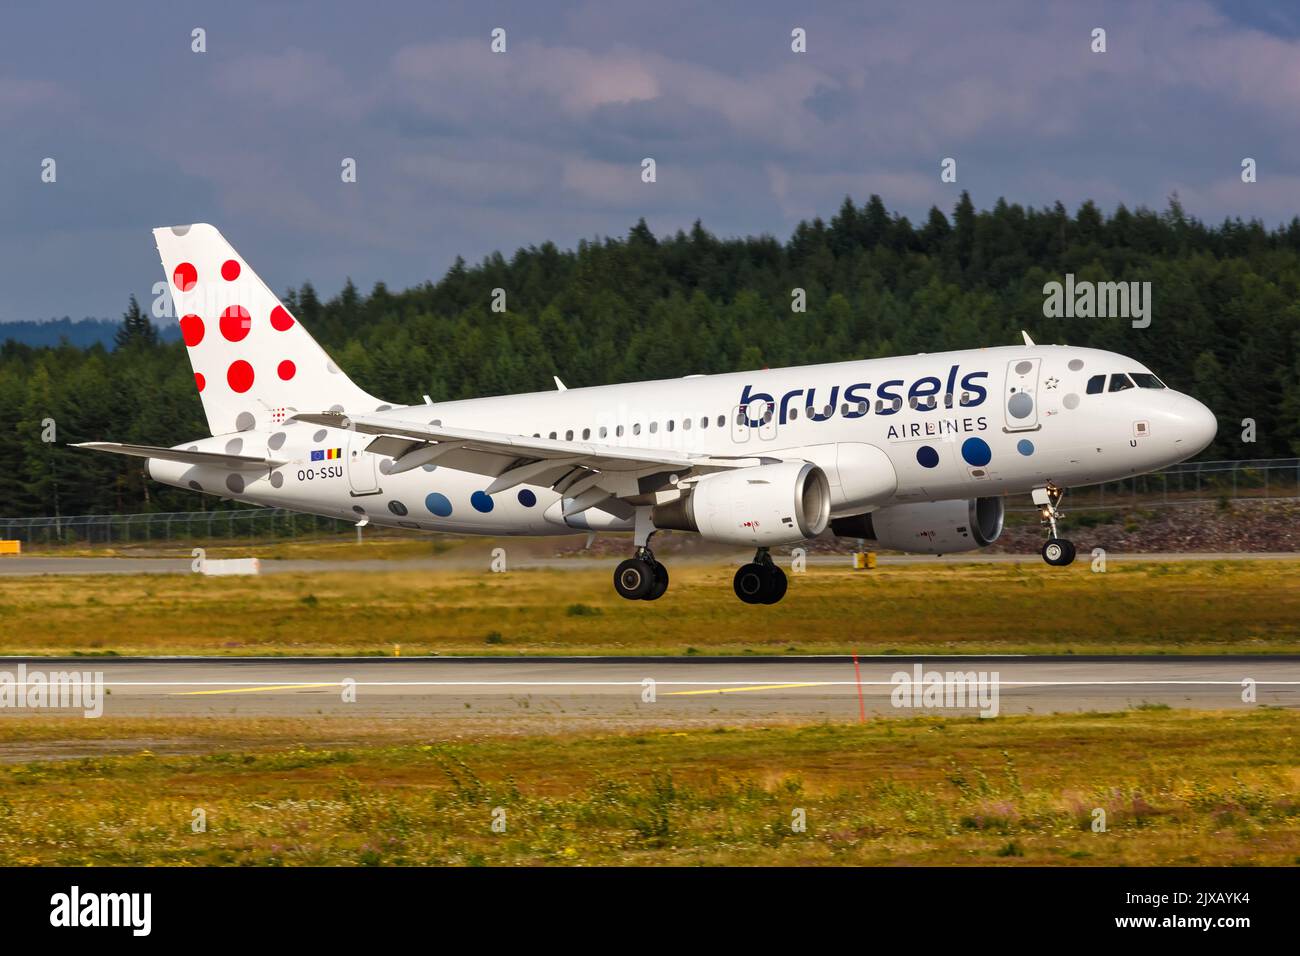 Oslo, Norway - August 15, 2022: Brussels Airlines Airbus A319 airplane at Oslo airport (OSL) in Norway. Stock Photo